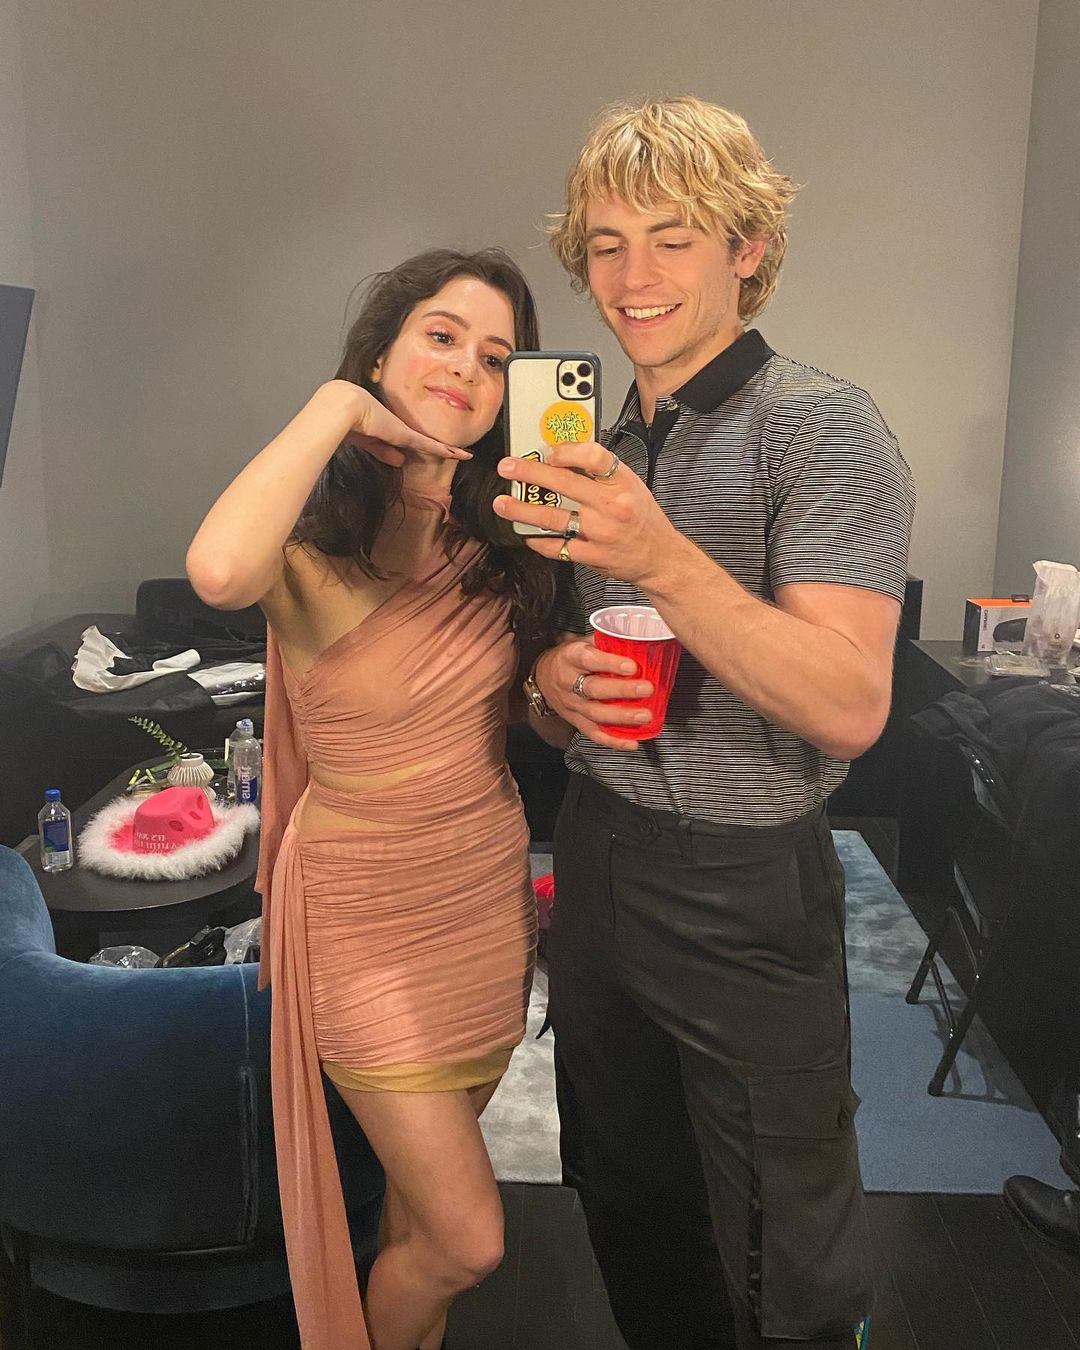 austin and ally season 2 ross and laura